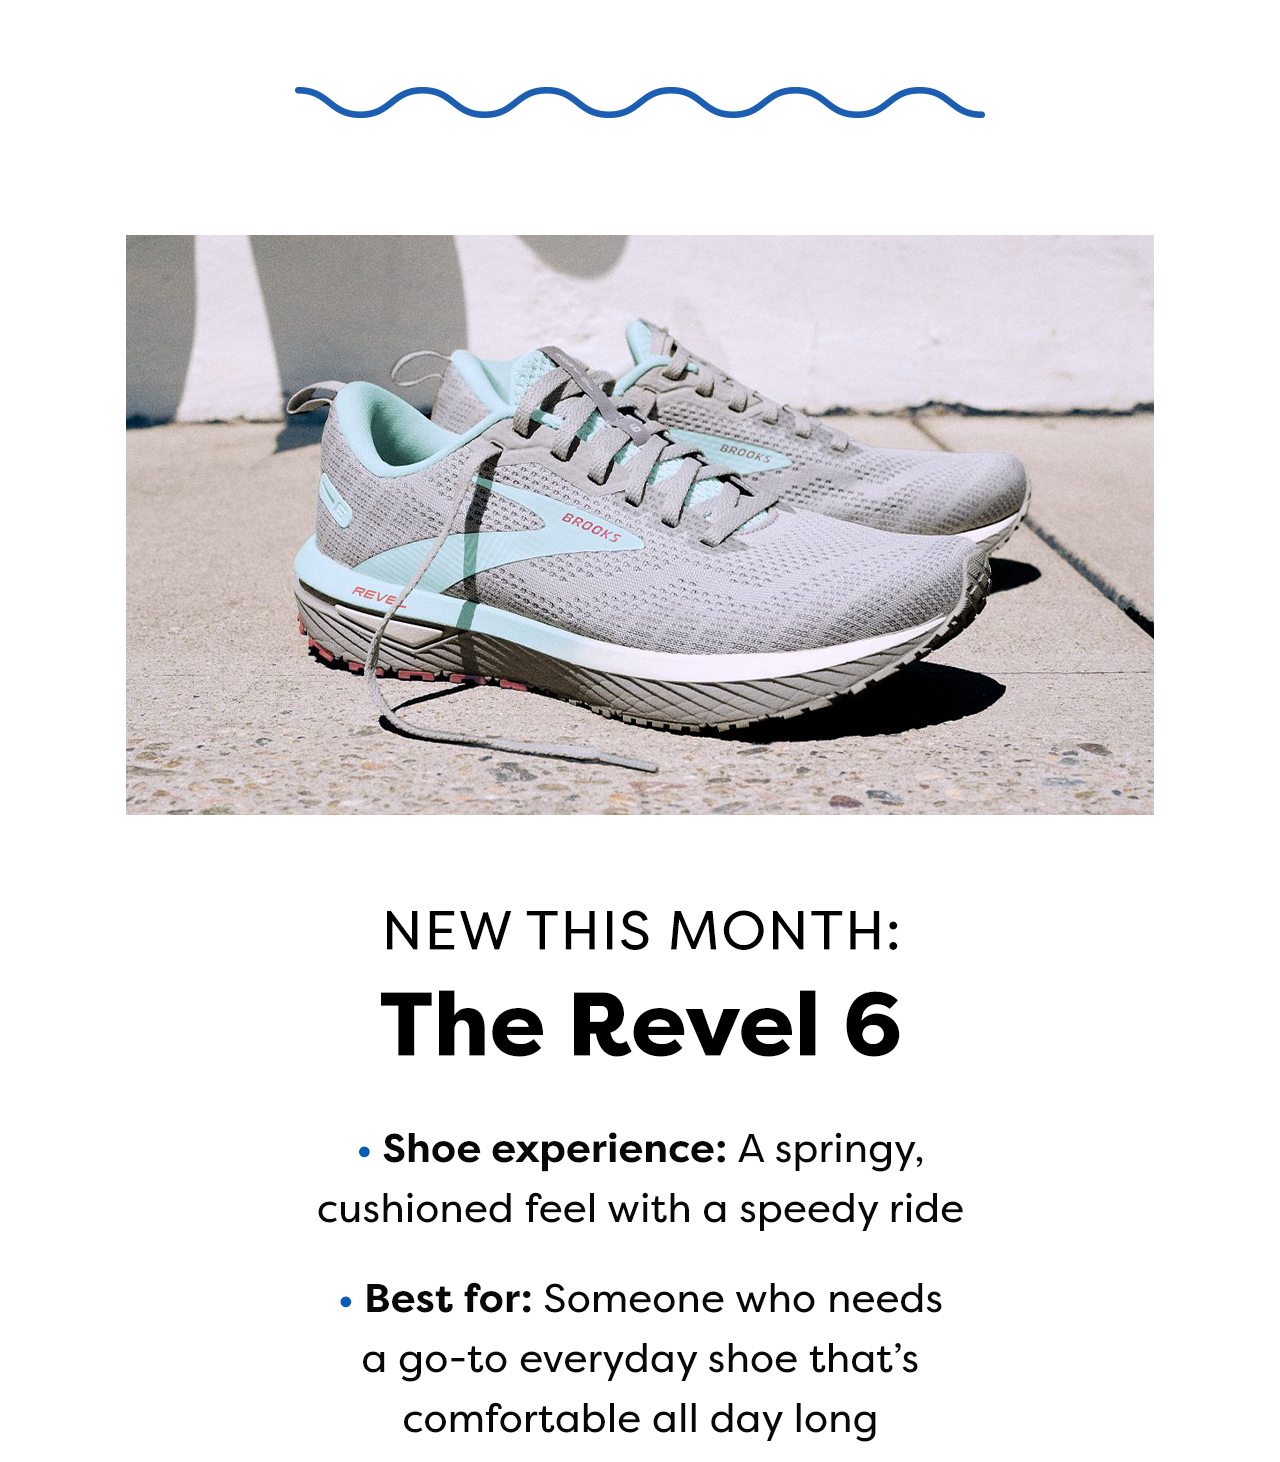 NEW THIS MONTH The Revel 6 - Shoe experience: A springy, cushioned feel with a speedy ride - Best for: Someone who needs a go-to everyday shoe that's comfortable all day long